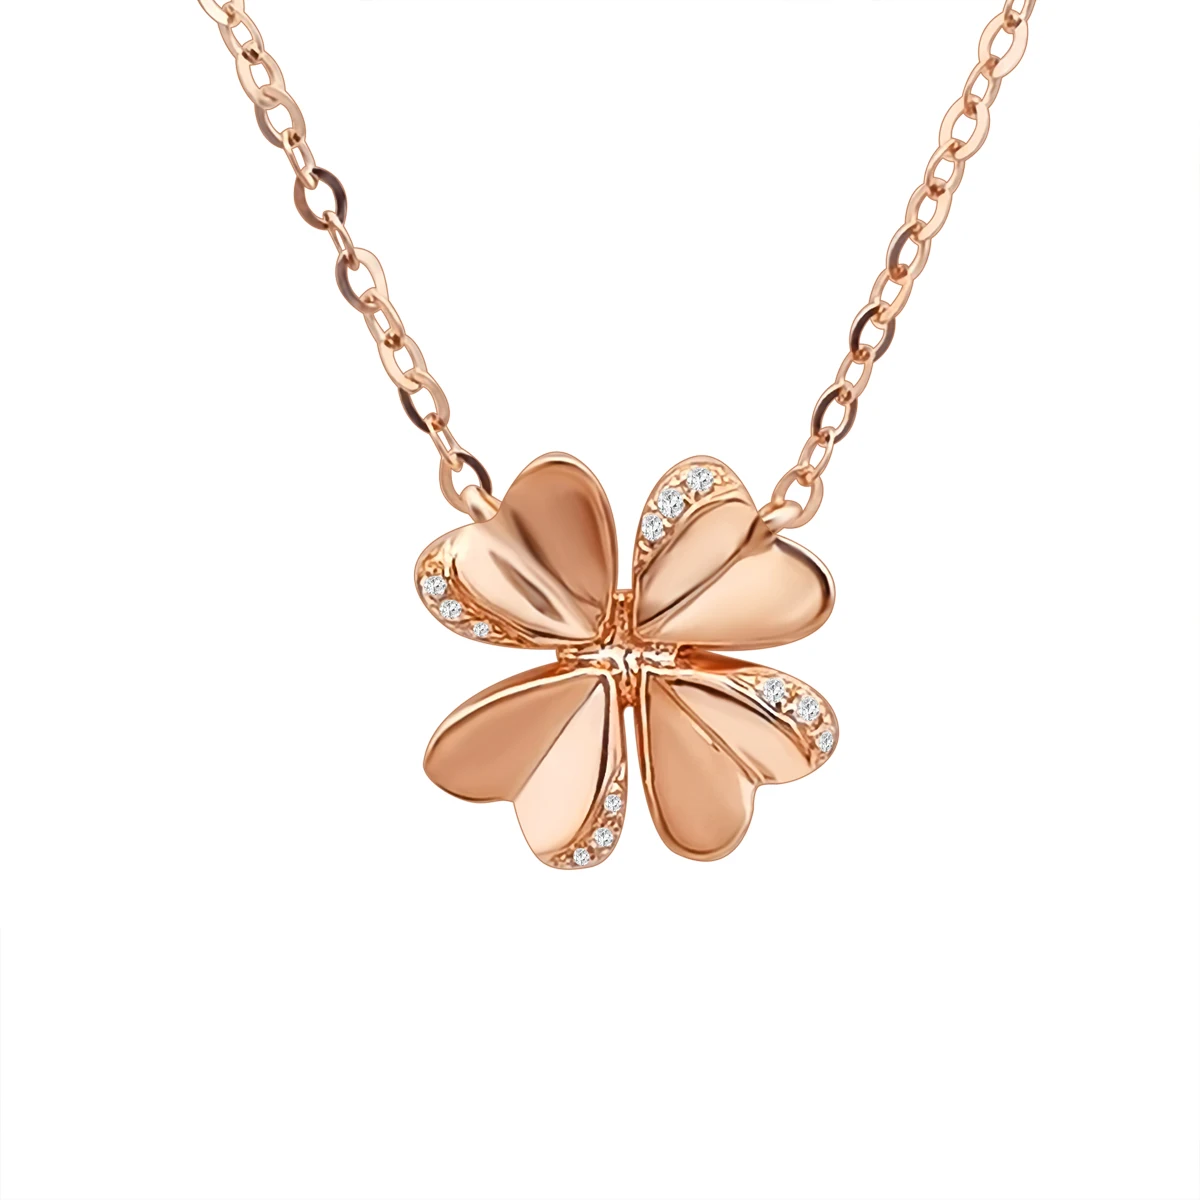 Arget's Exclusive Flower Necklace Gold Touch Rose with 2 Leafs, Made with Original for All Ages for Women and Girls.